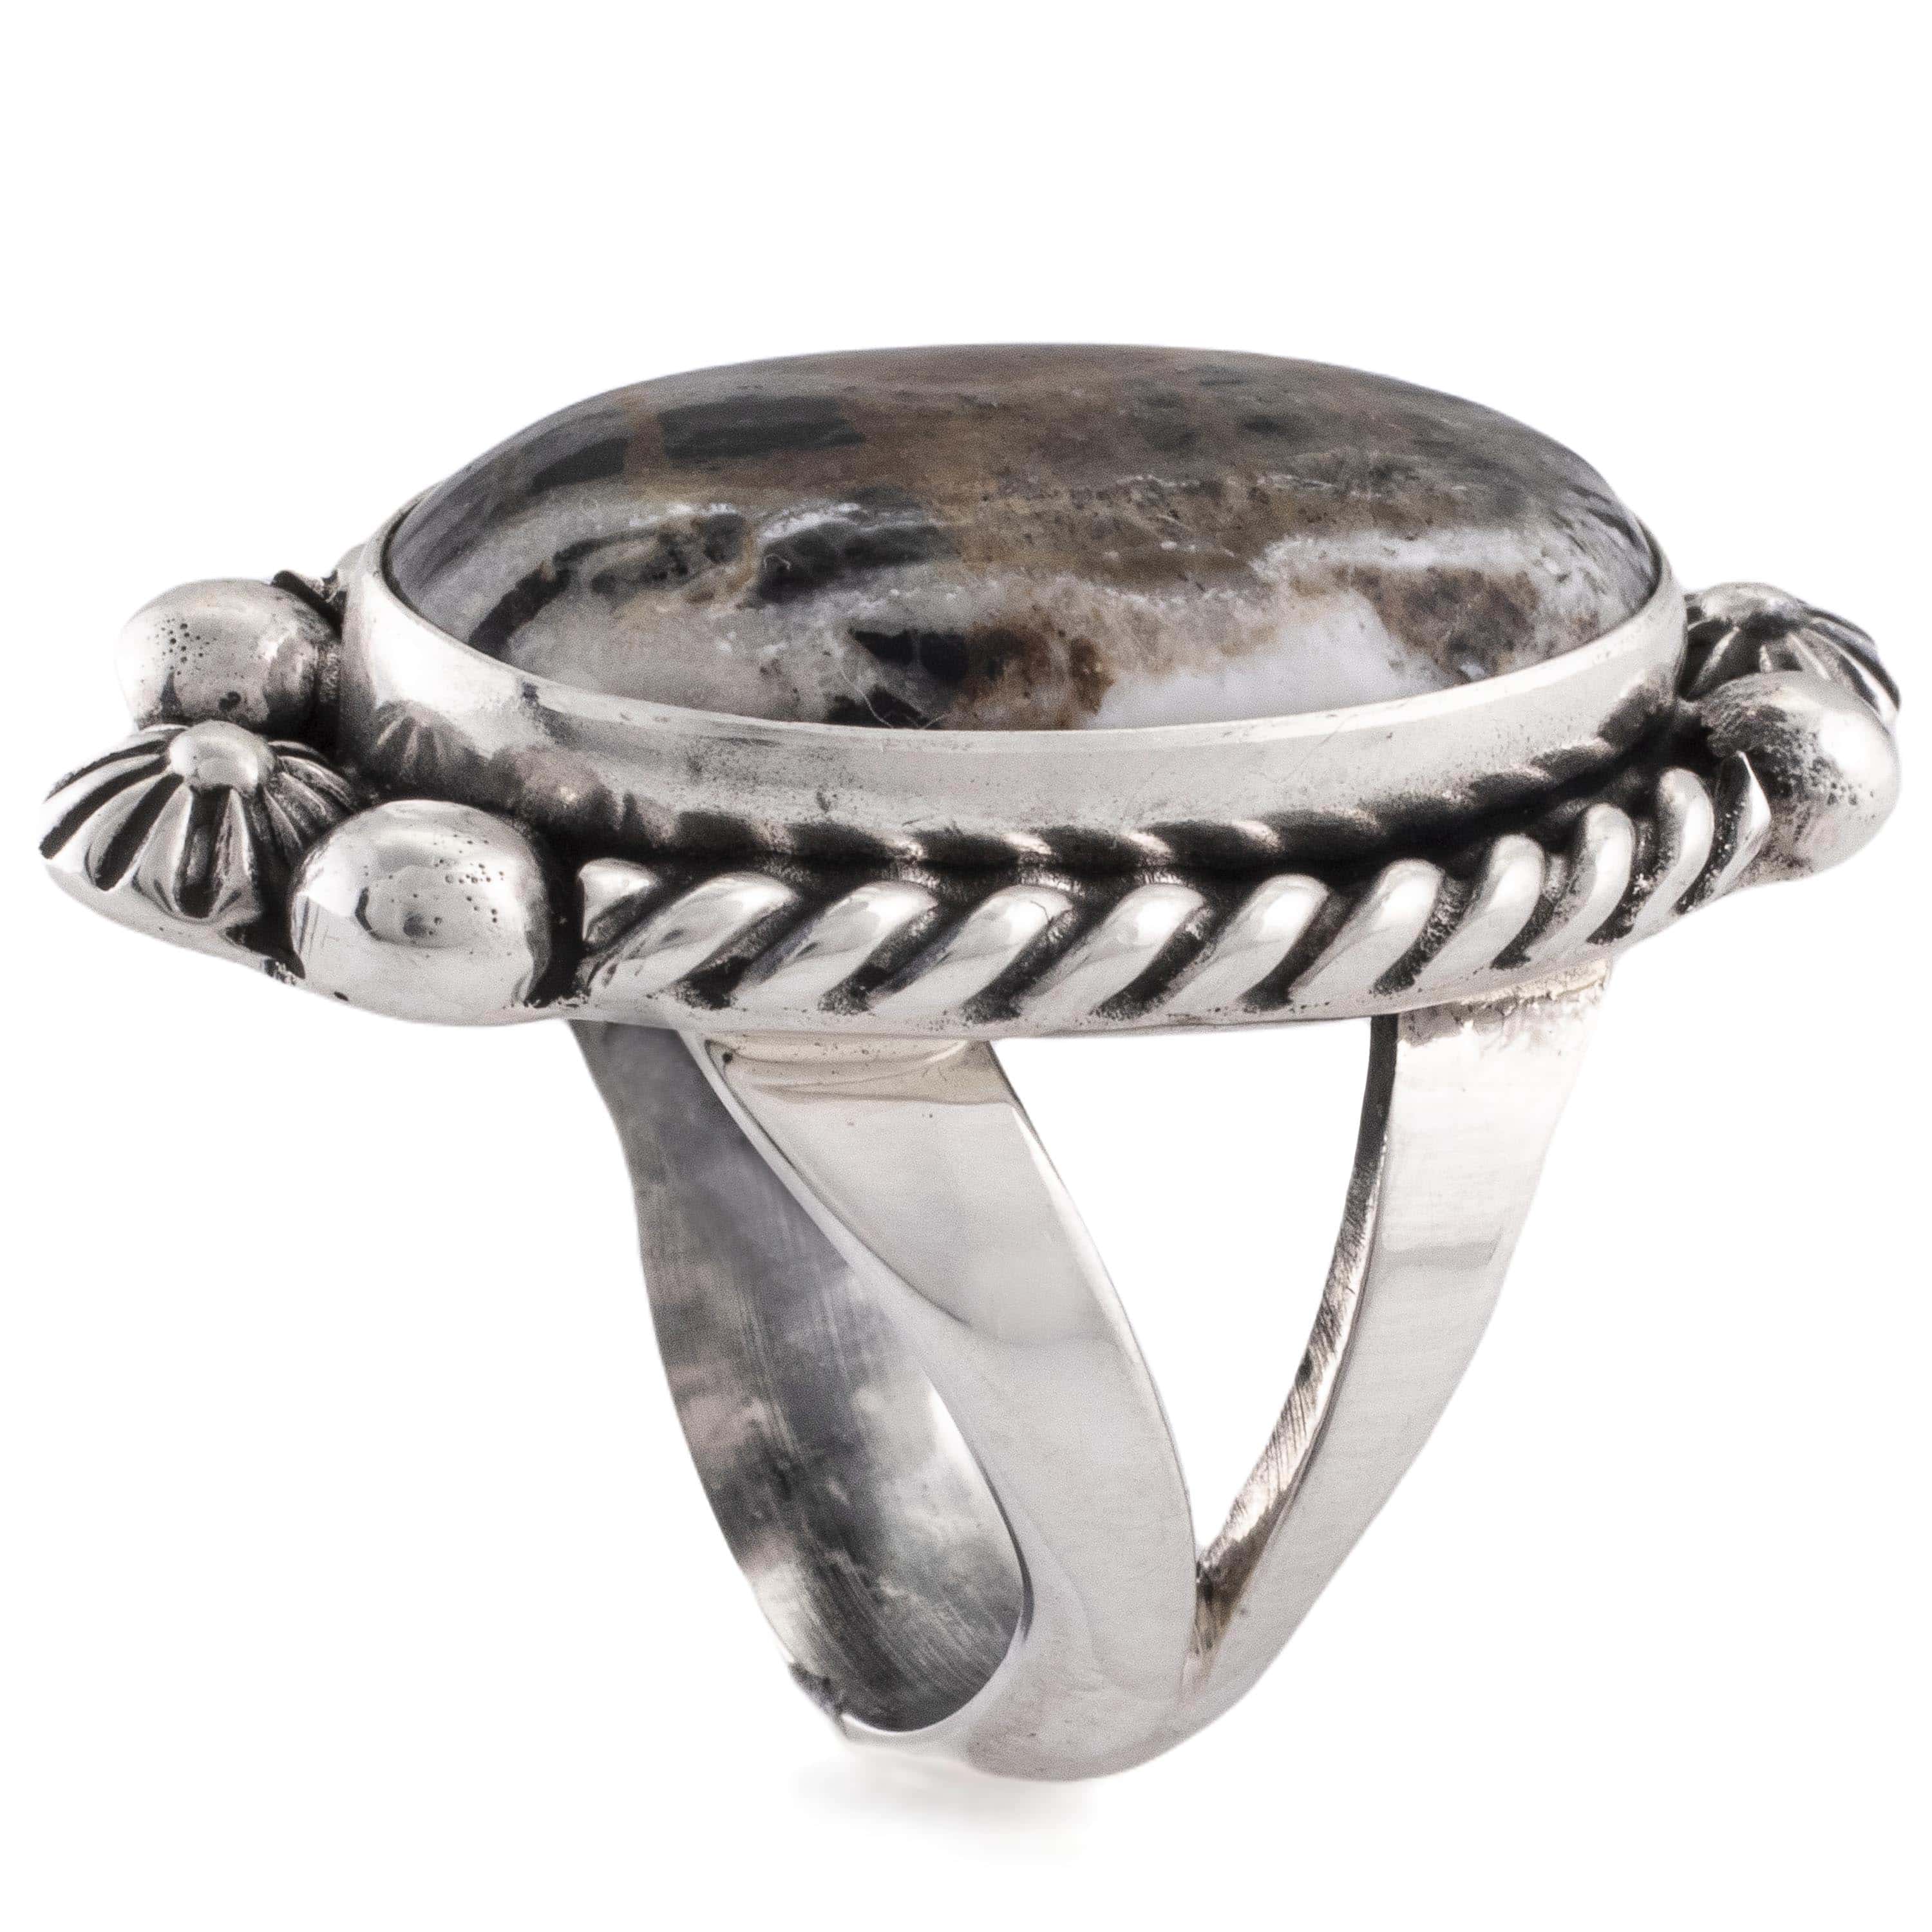 Kalifano Native American Jewelry 8 Eddie Secatero Navajo White Buffalo Turquoise USA Native American Made 925 Sterling Silver Ring NAR800.030.8